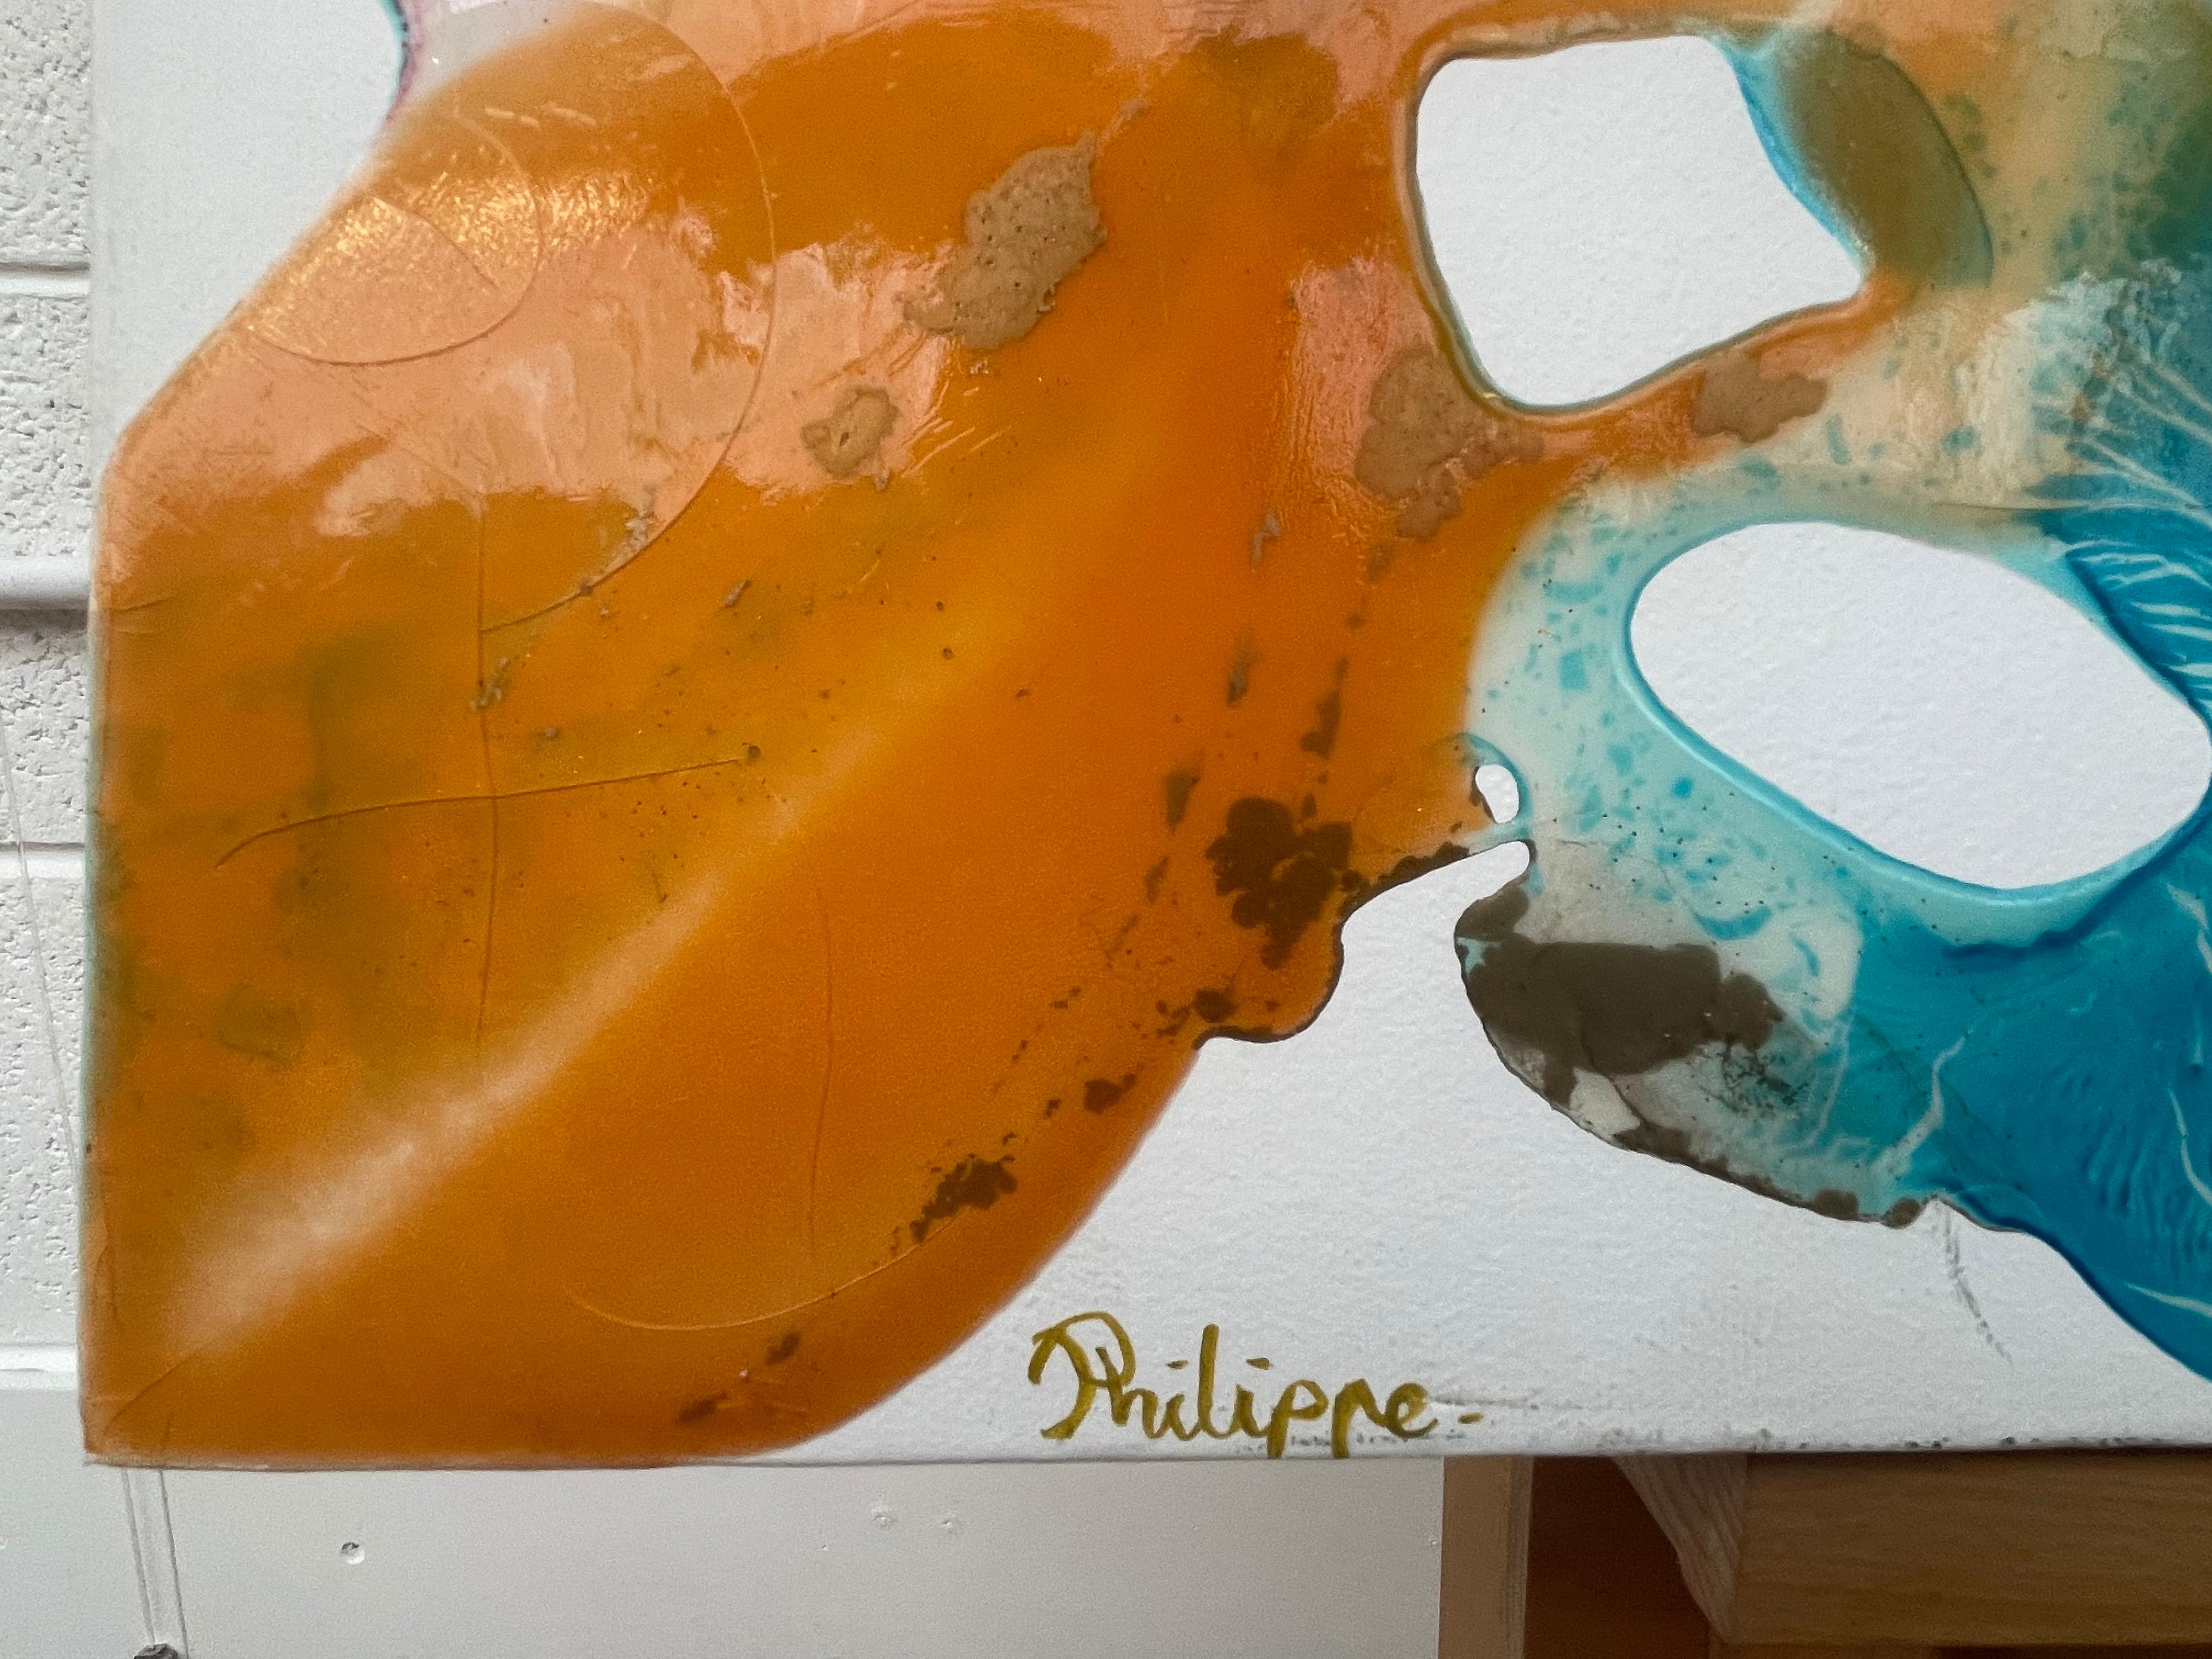 Colourful Abstract Painting using Orange & Turquoise Resin on a White Canvas  For Sale 3